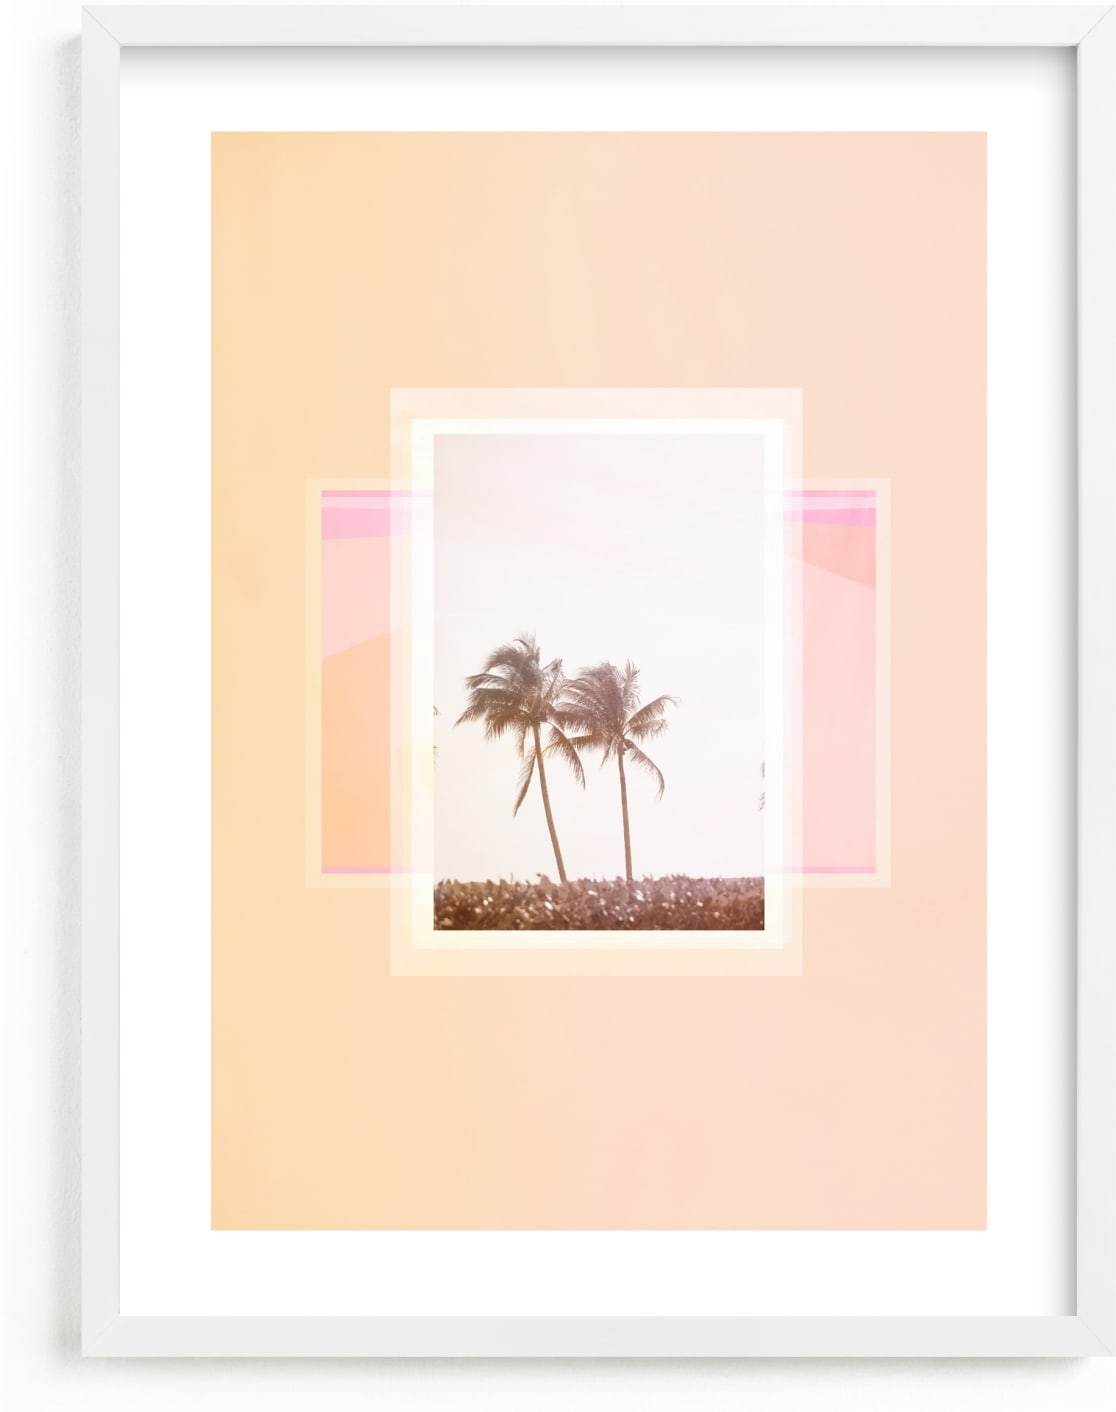 This is a pink, orange kids wall art by Dawn Smith called Sweet summer palms..